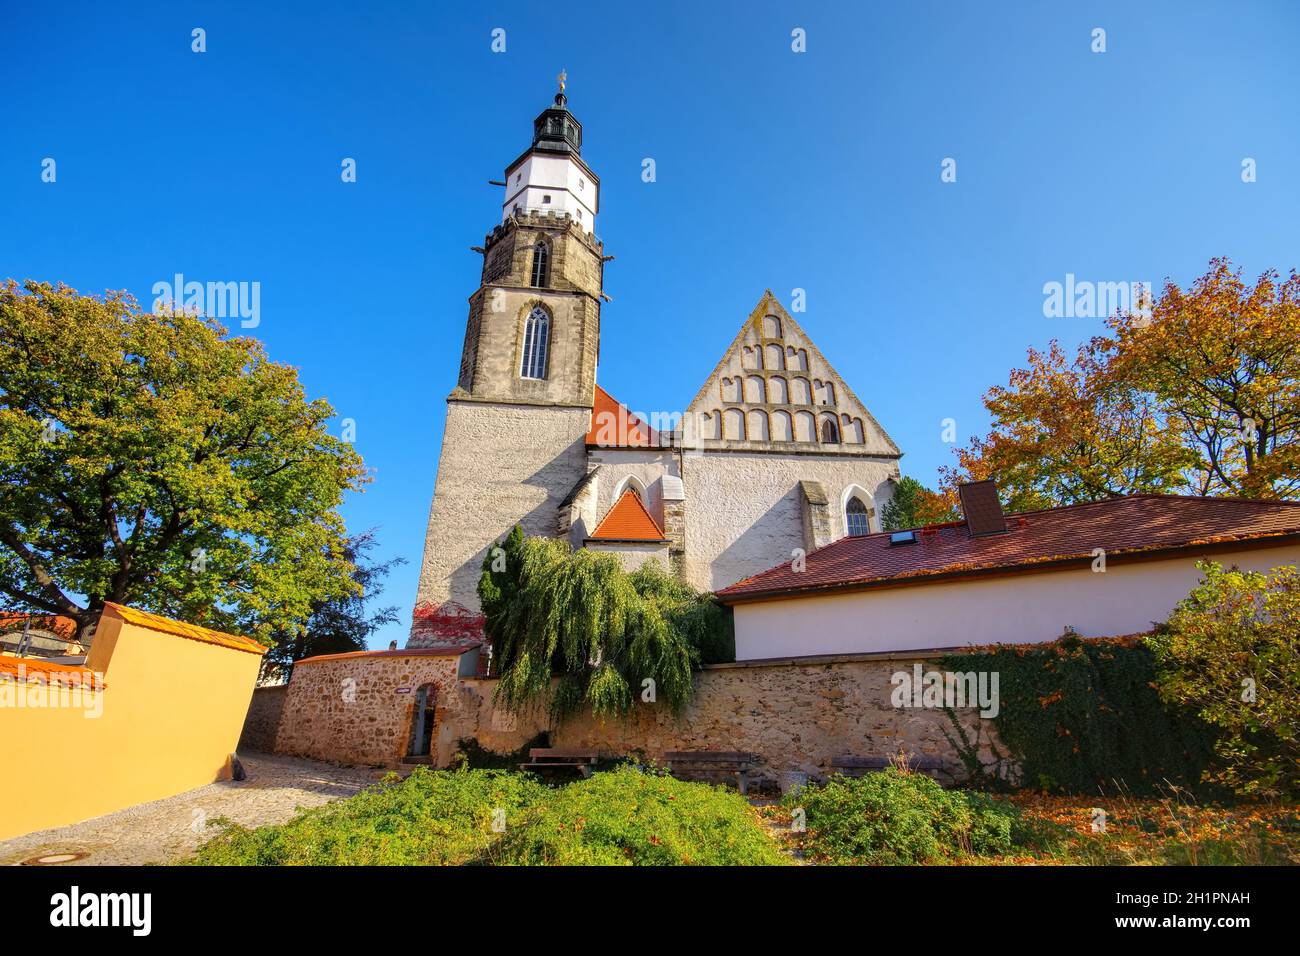 St Mary Church in the town Kamenz, Saxony in Germany Stock Photo